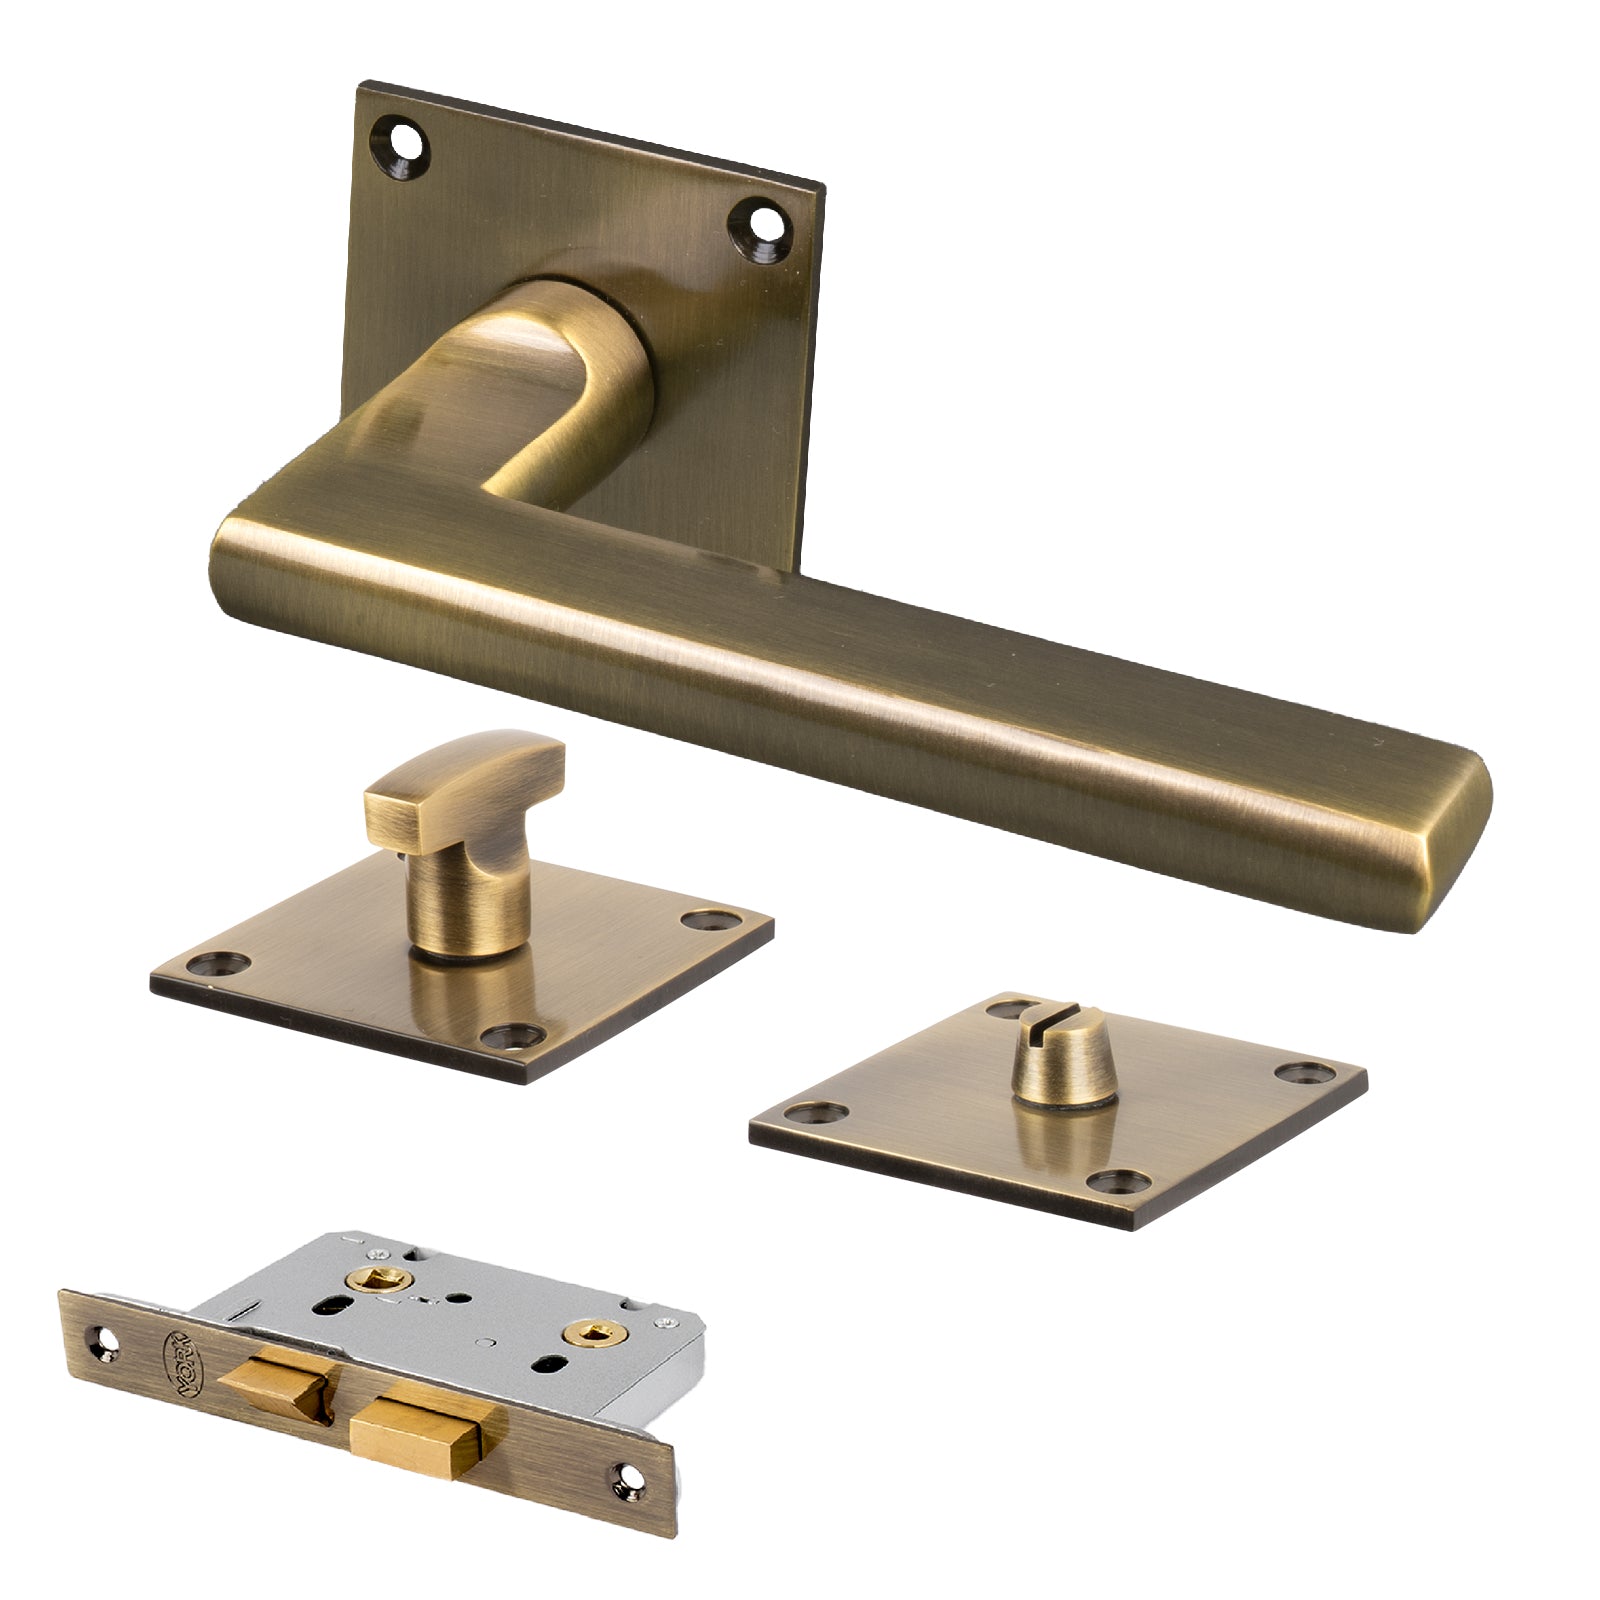 SHOW Trident Square Rose Door Handles Bathroom Set with Aged Brass finish